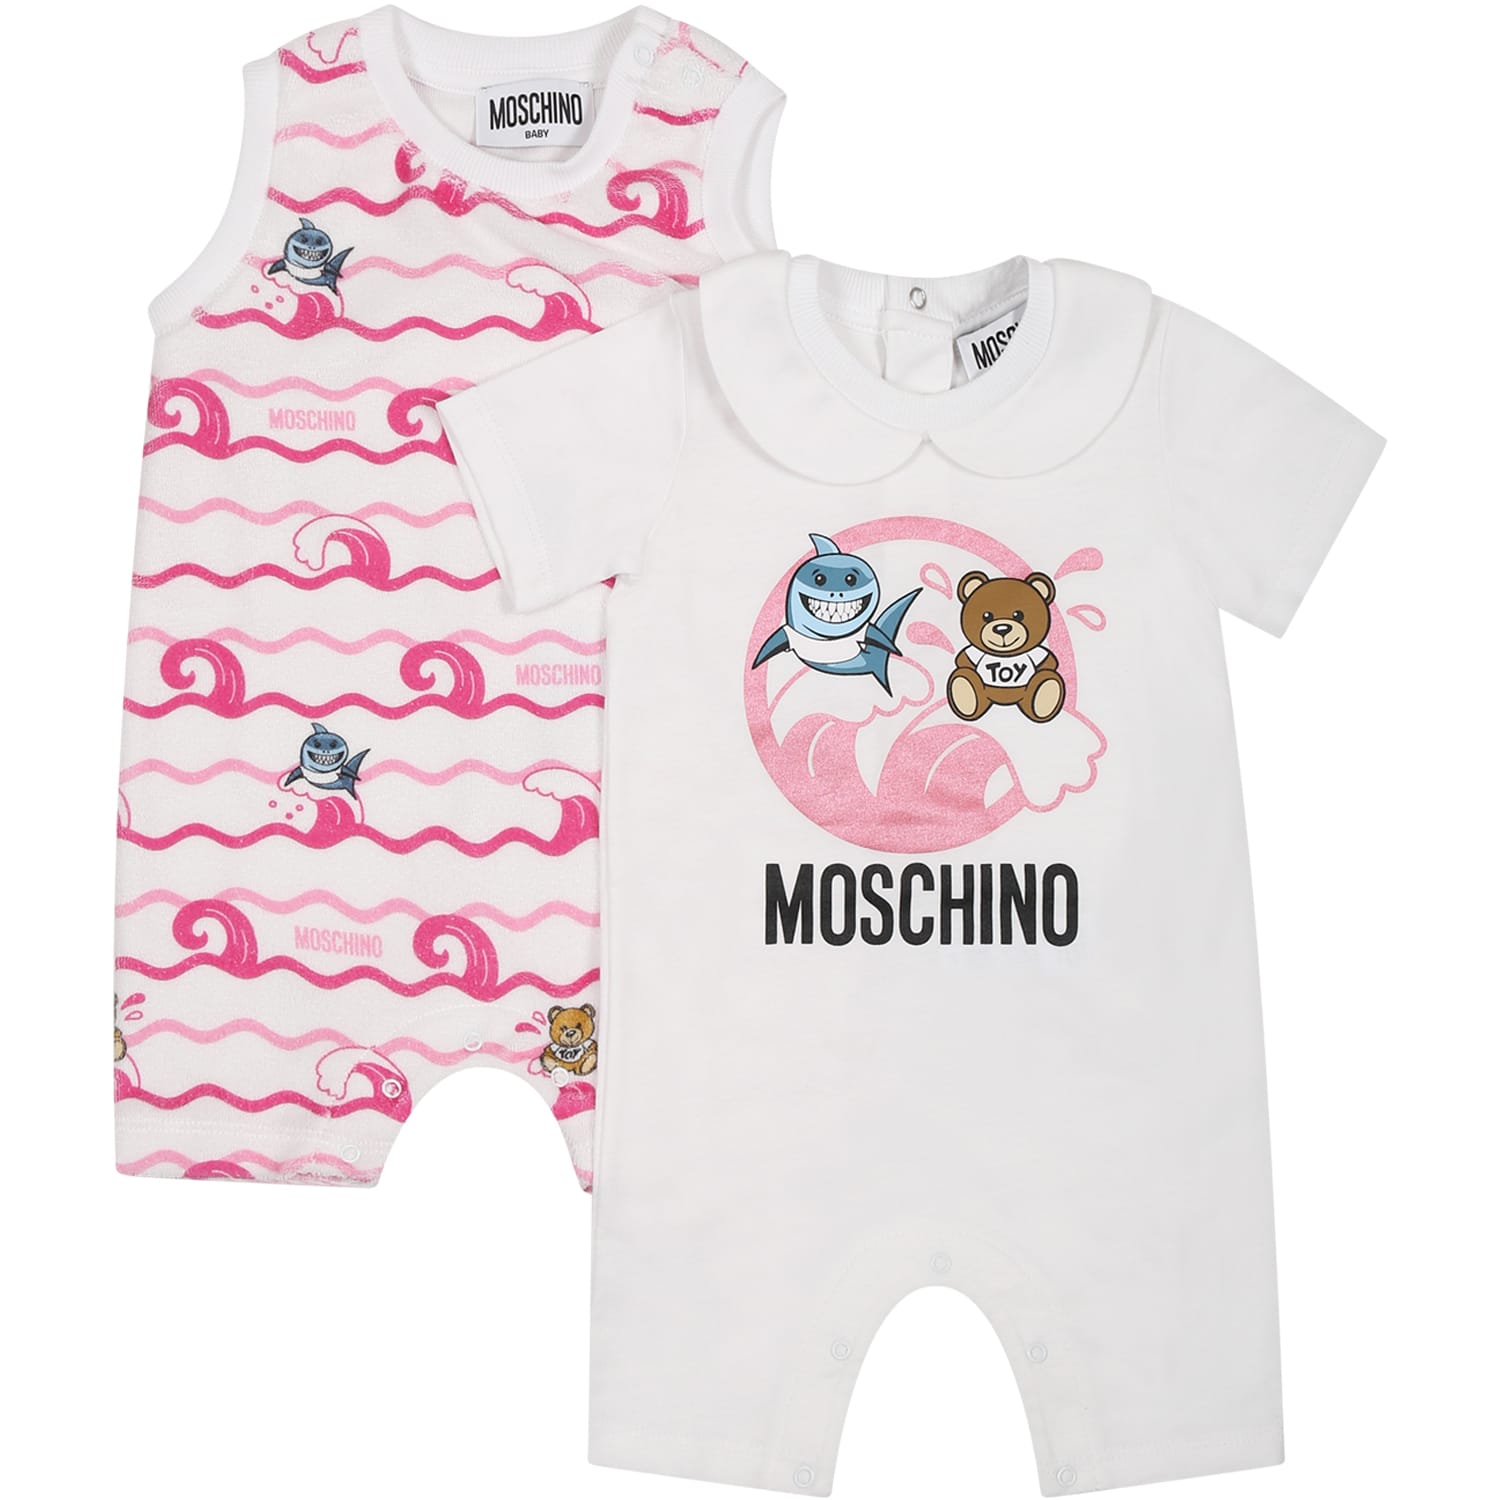 Moschino Pink Set For Baby Girl With Print And Teddy Bear